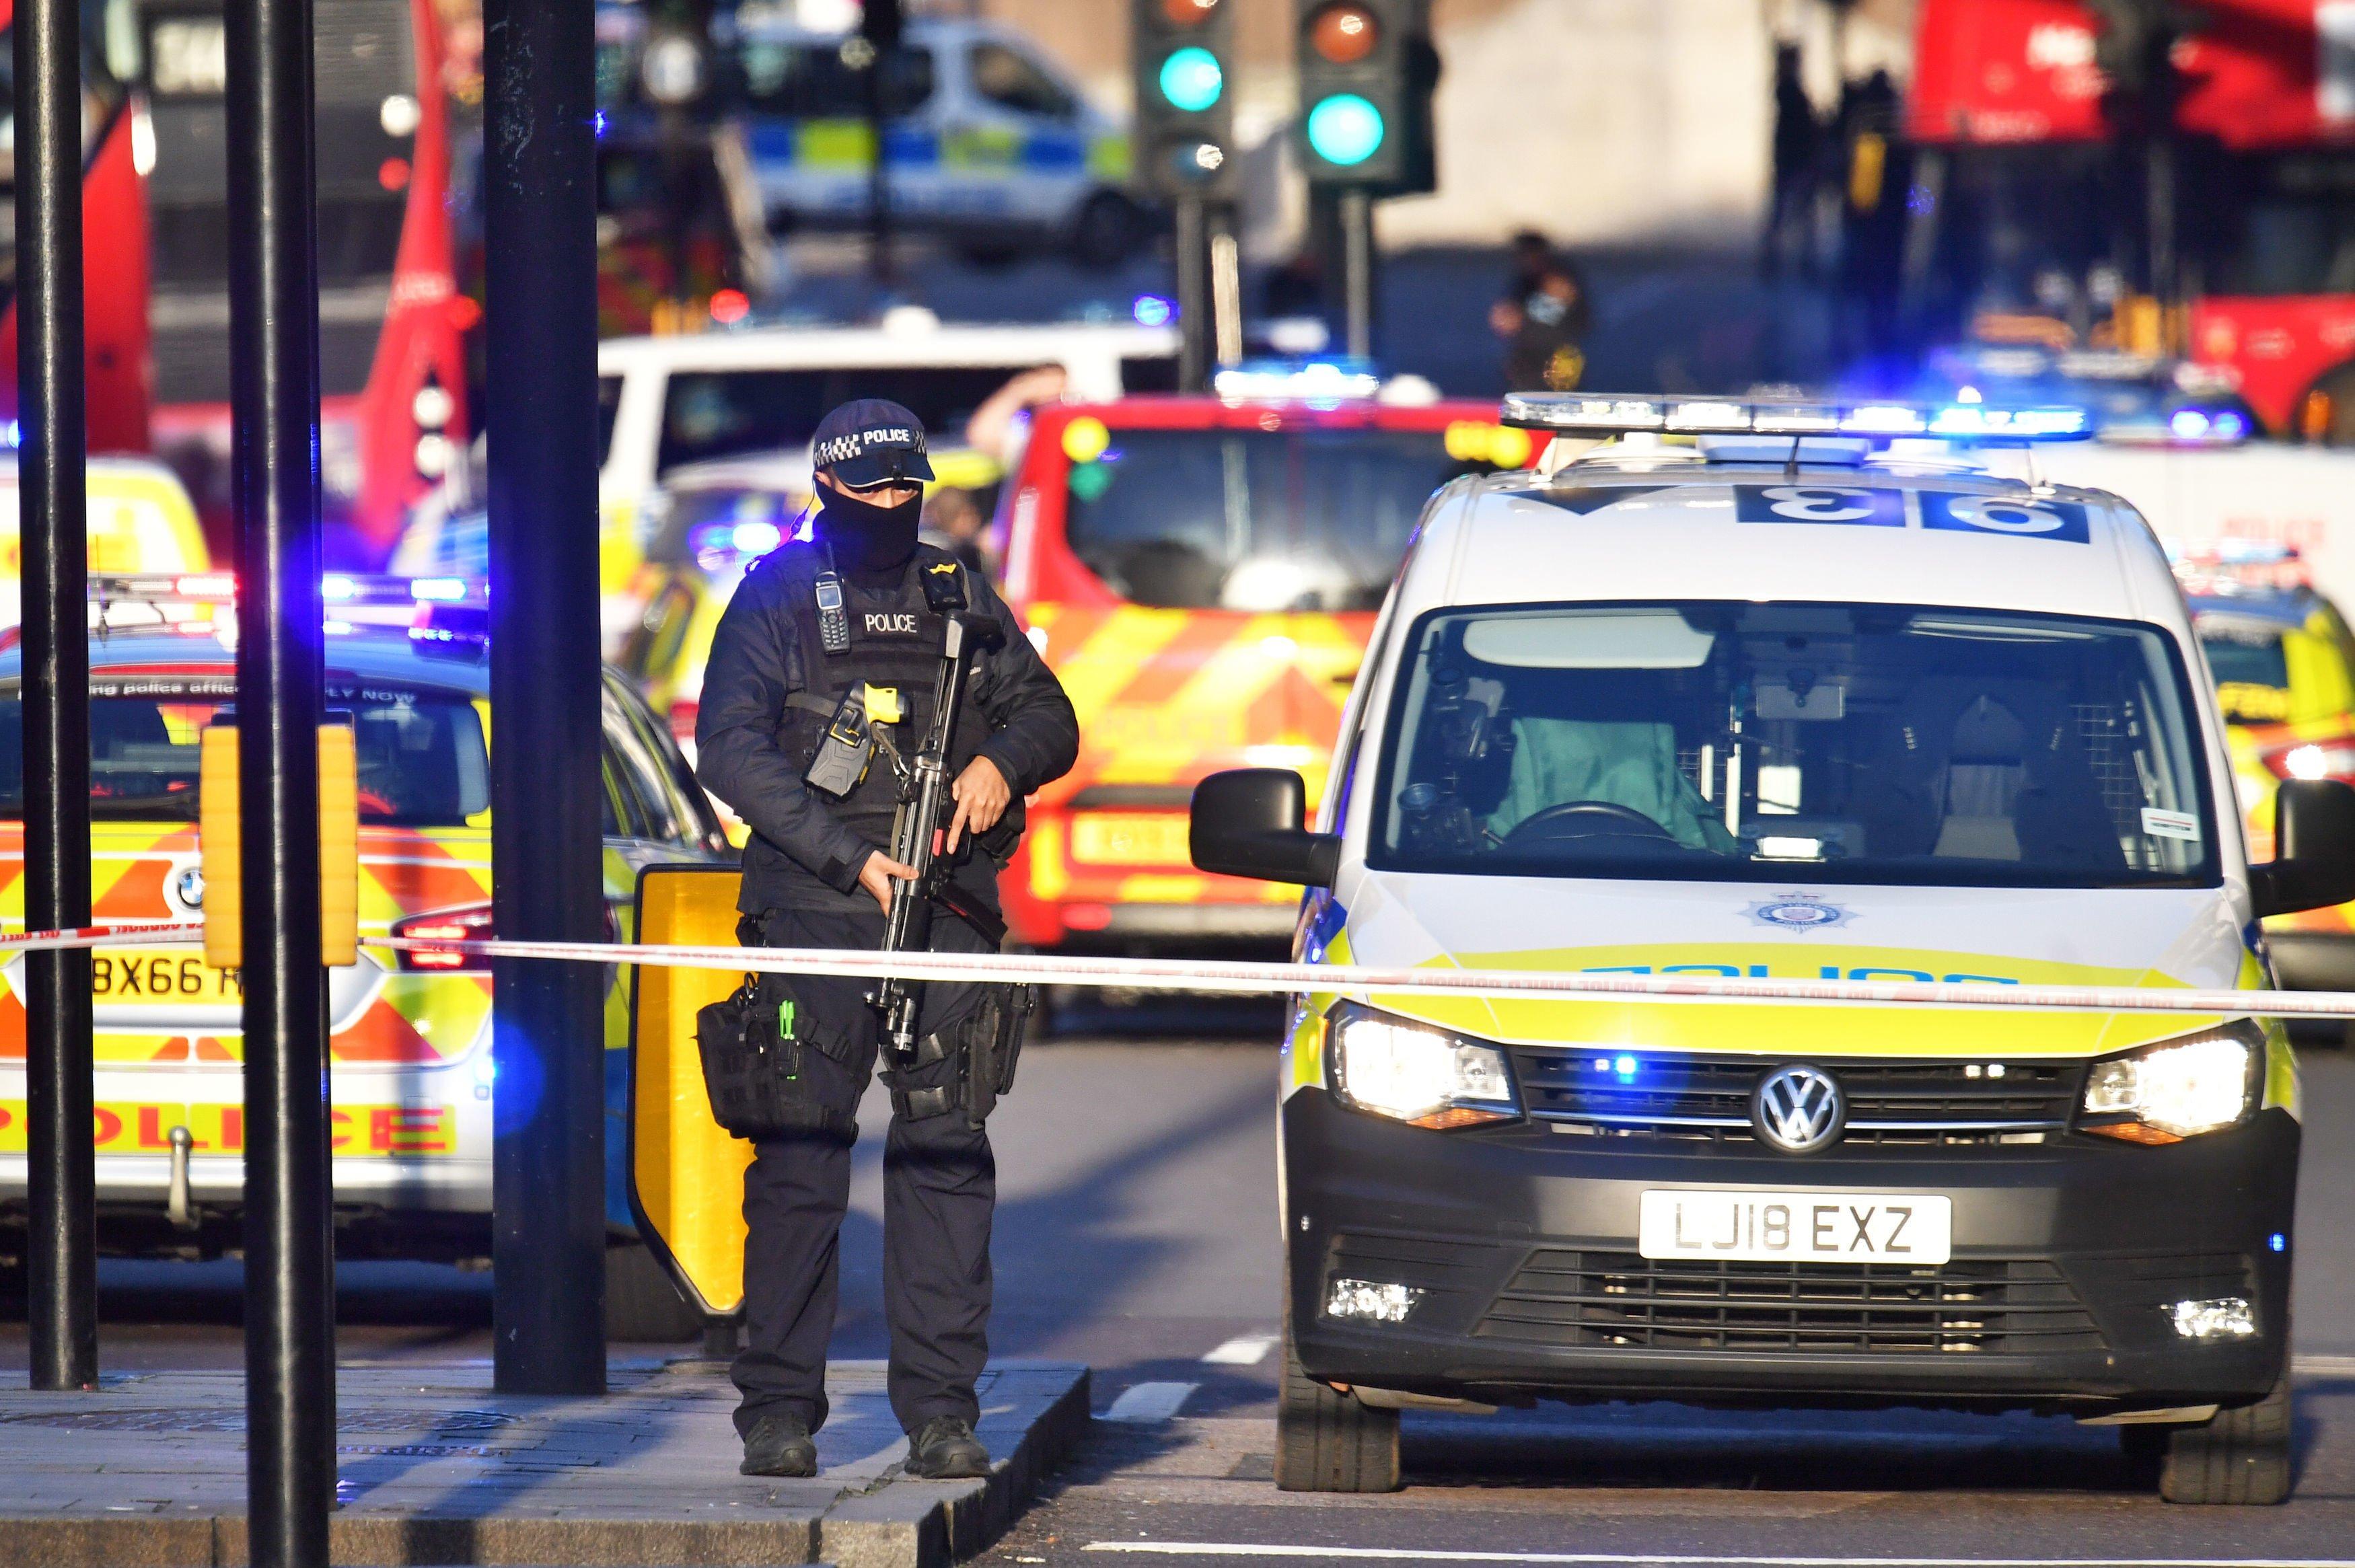 Armed police at the scene of an incident on London Bridge in central London. PA Photo. Picture date: Friday November 29, 2019.